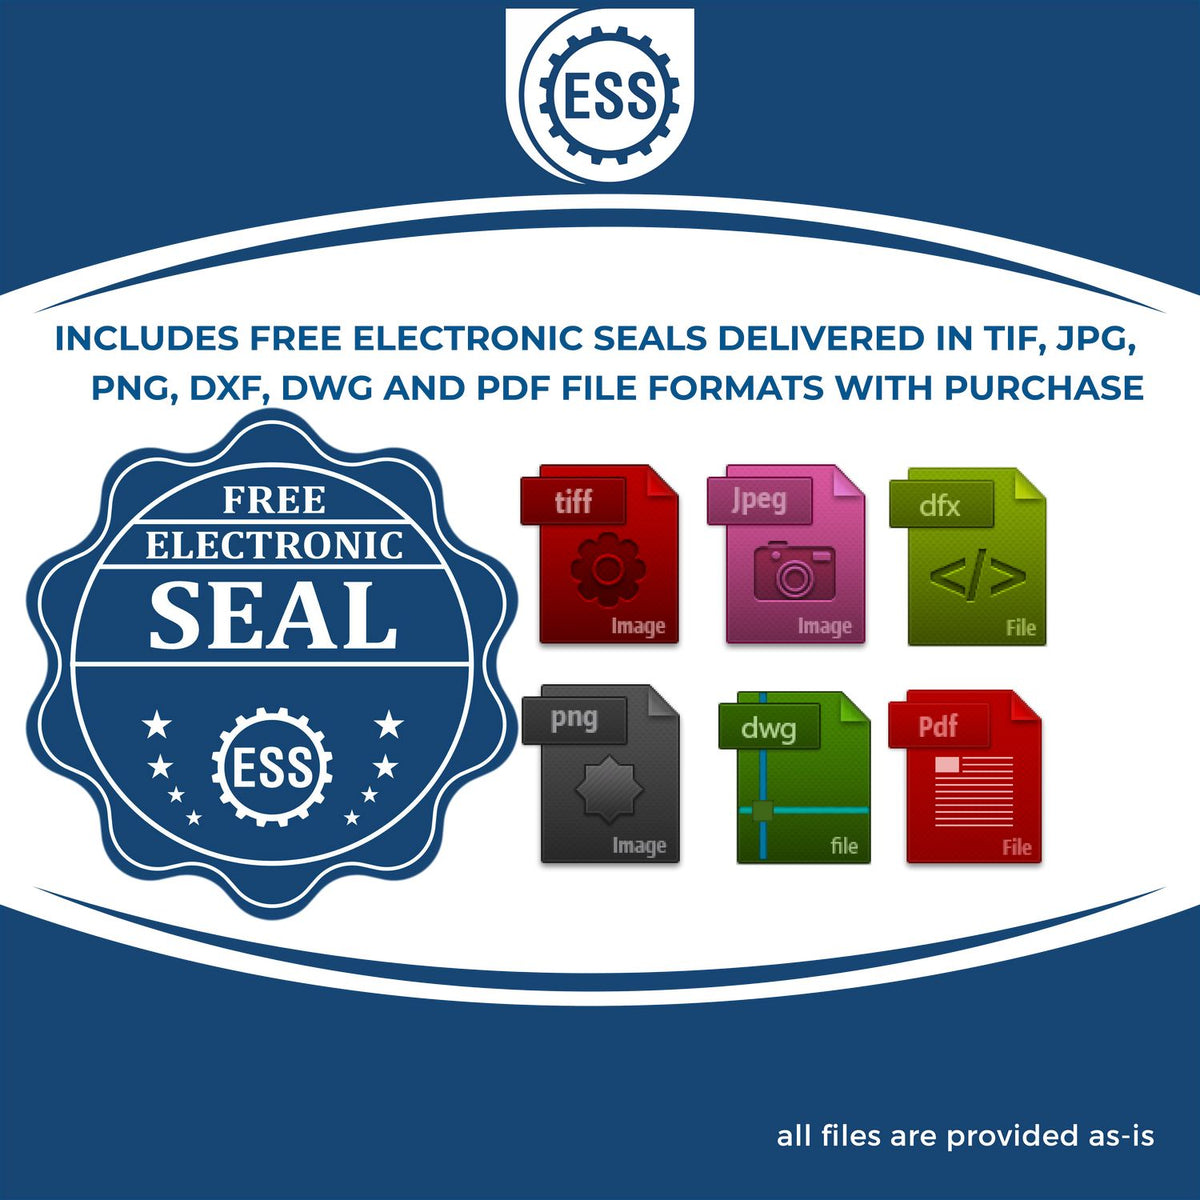 An infographic for the free electronic seal for the Texas Professional Geologist Seal Stamp illustrating the different file type icons such as DXF, DWG, TIF, JPG and PNG.